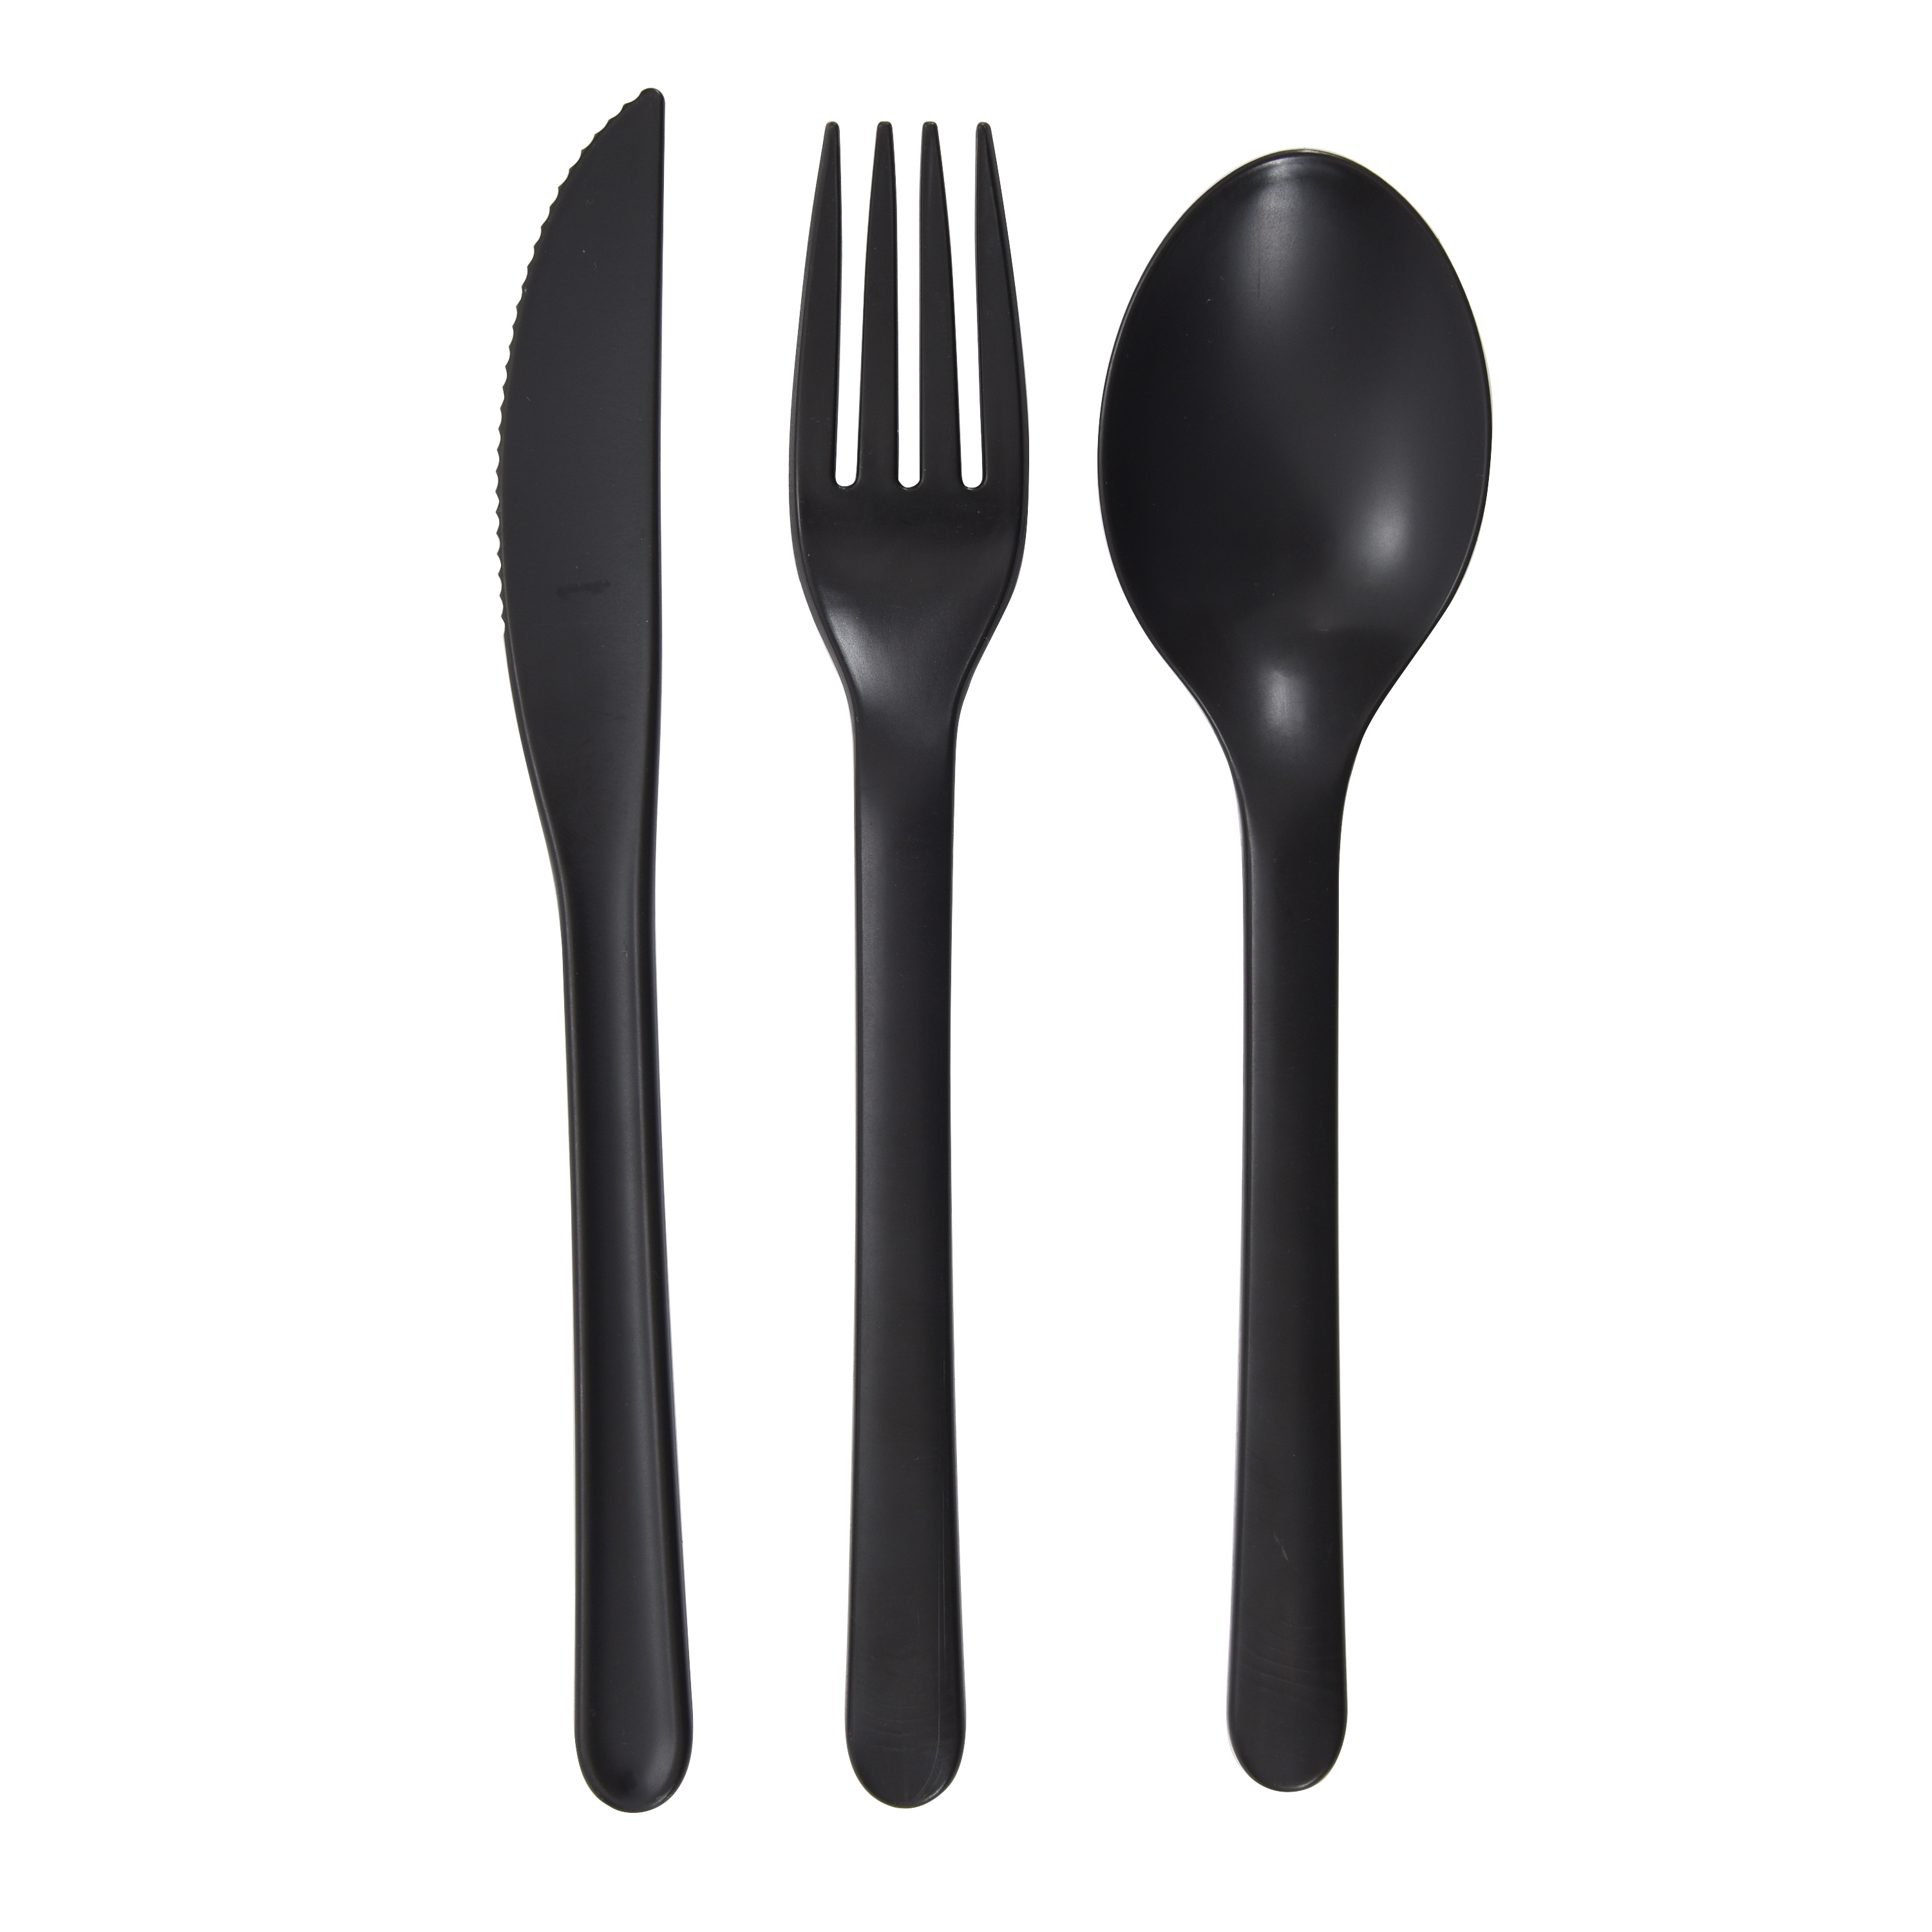 Mainstays Eco-Friendly Recycled Plastic 3-Piece Flatware Set, Black - image 1 of 9